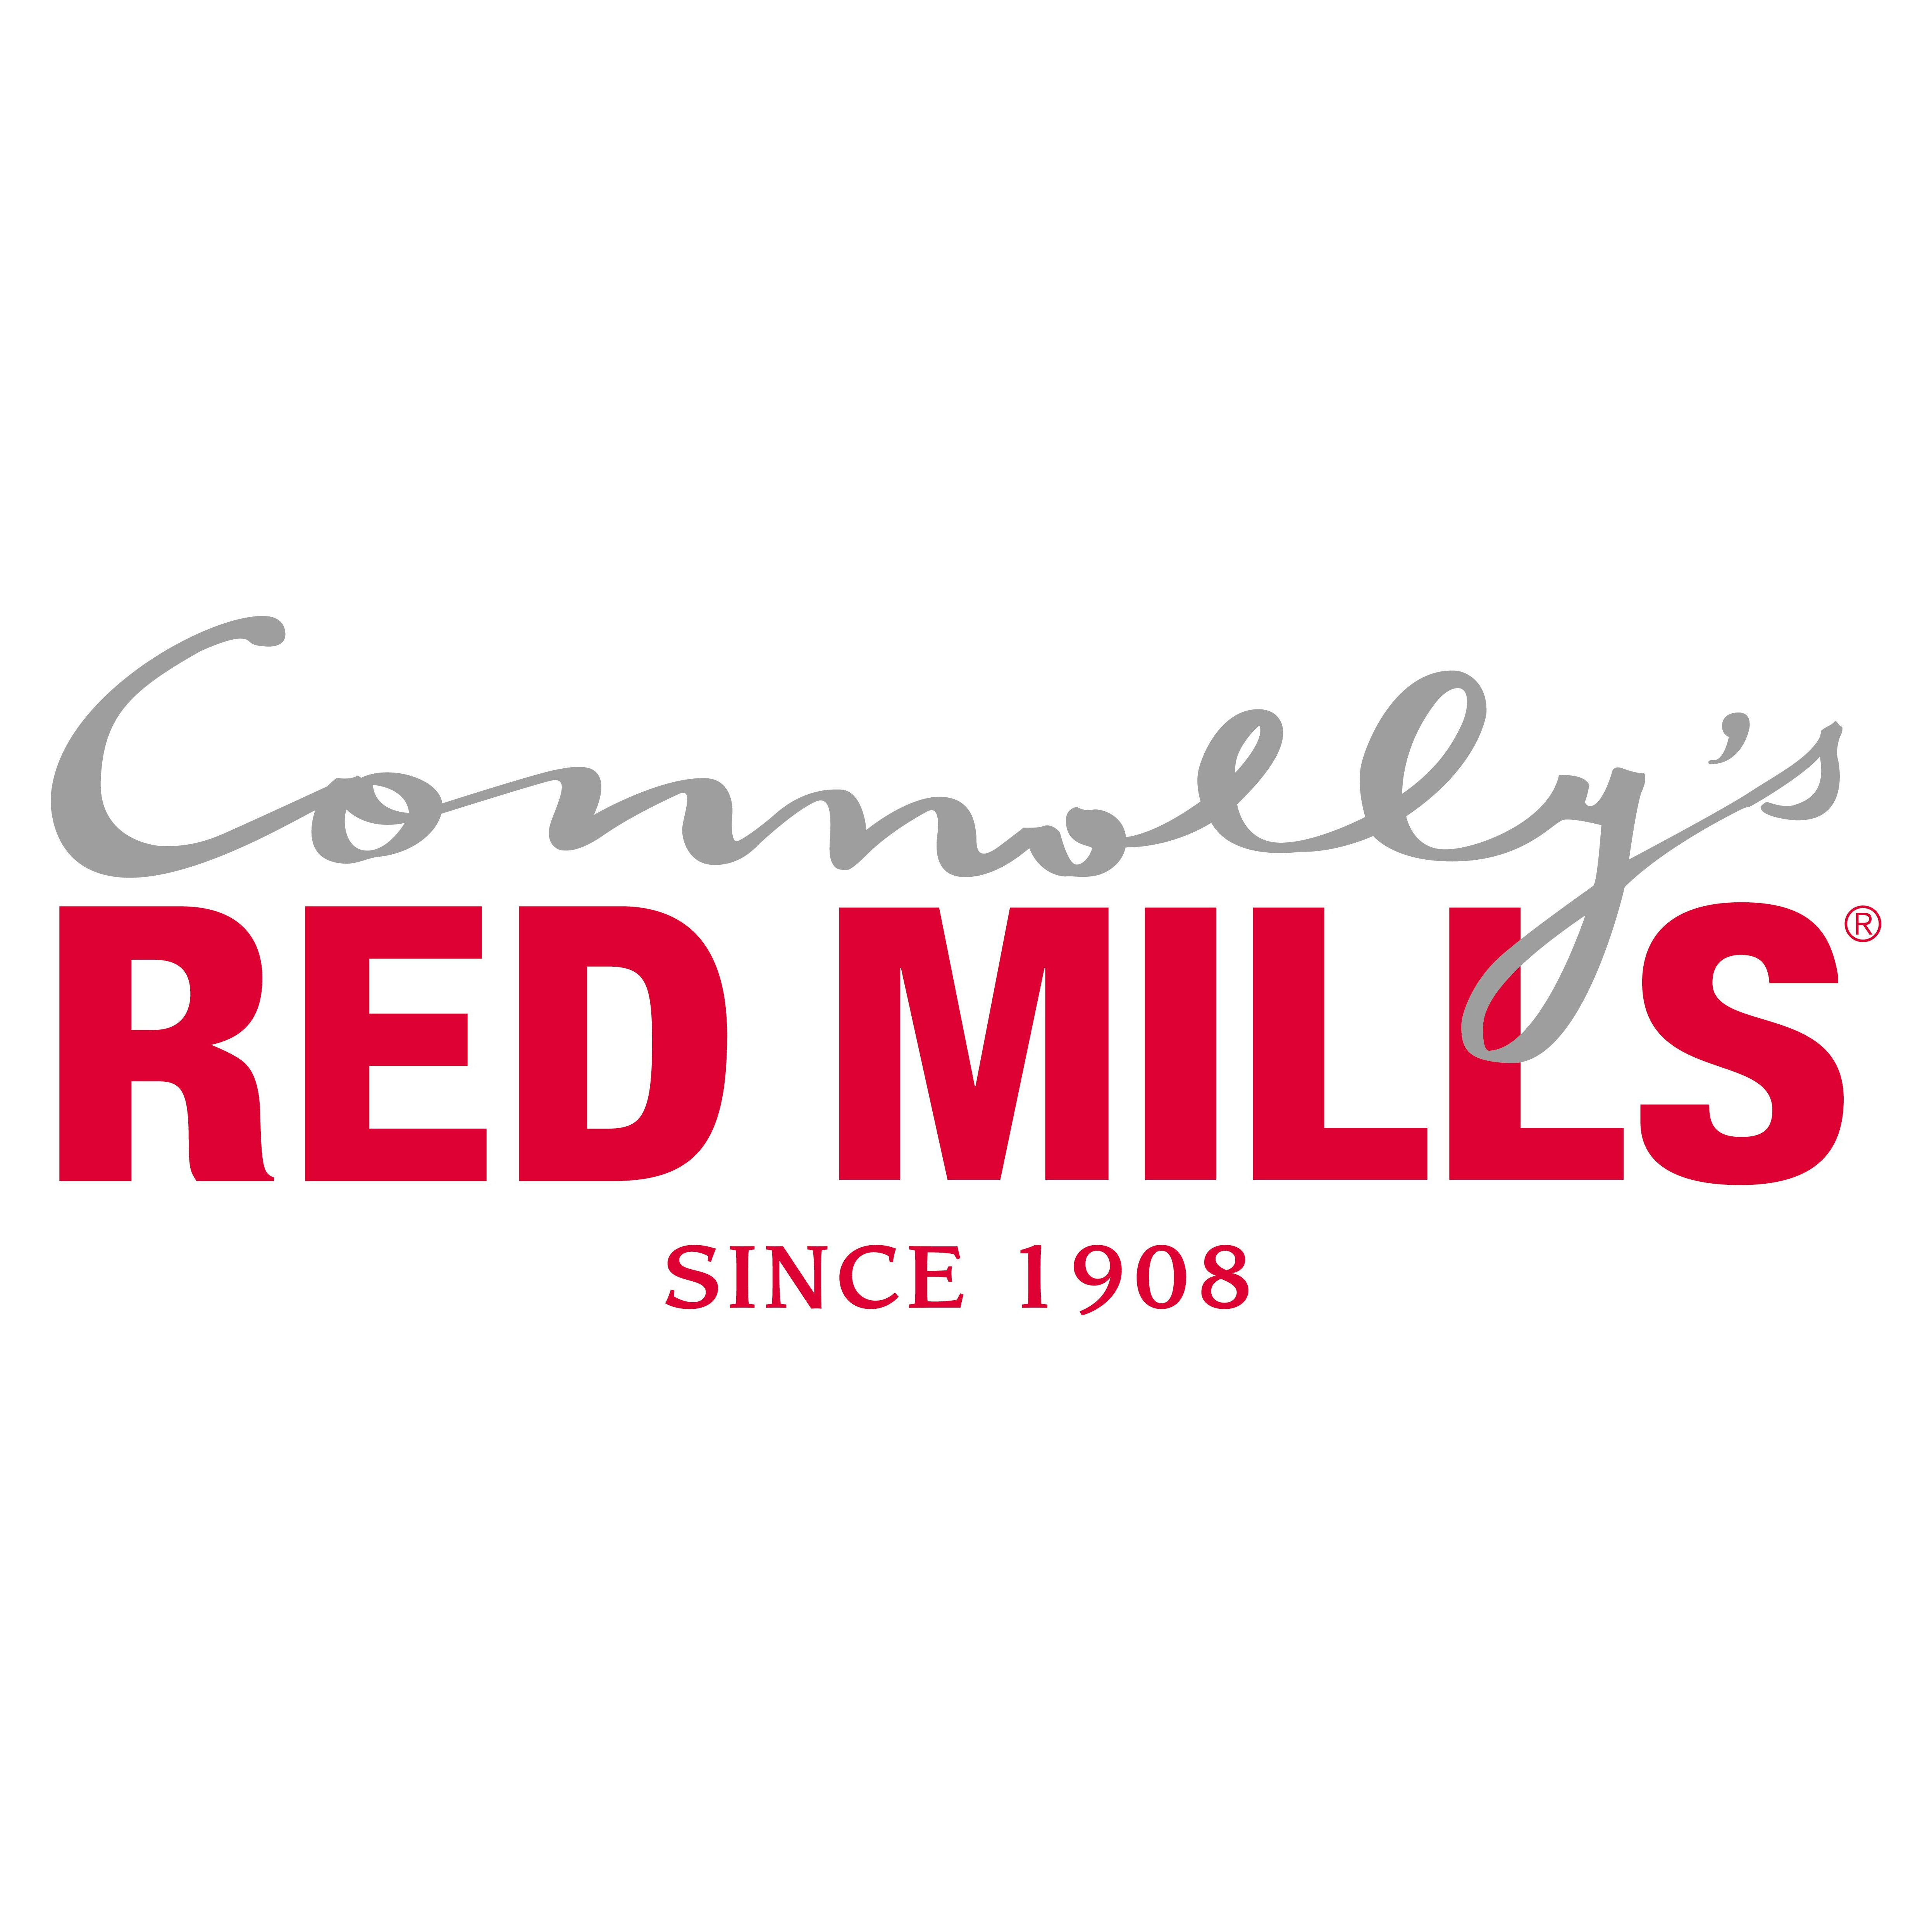 Connolly's Red Mills